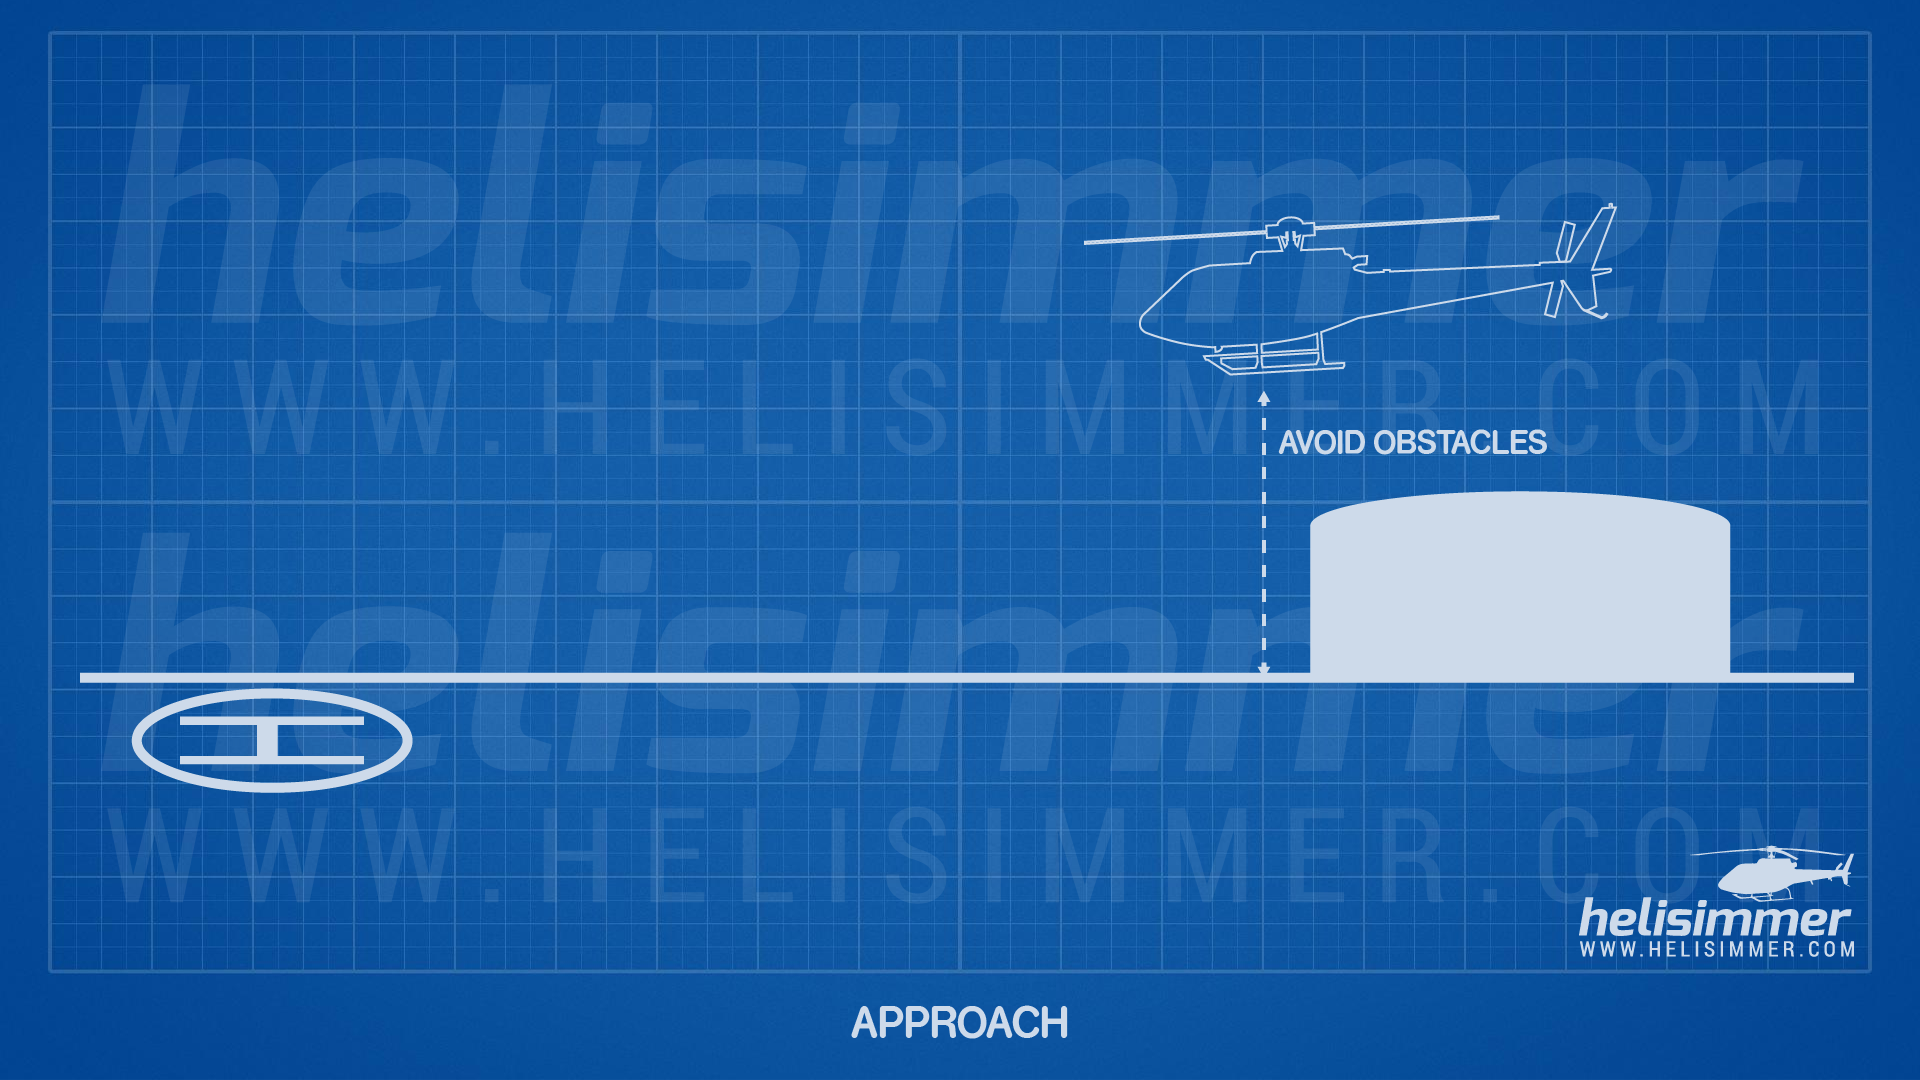 How to fly helicopters - approach